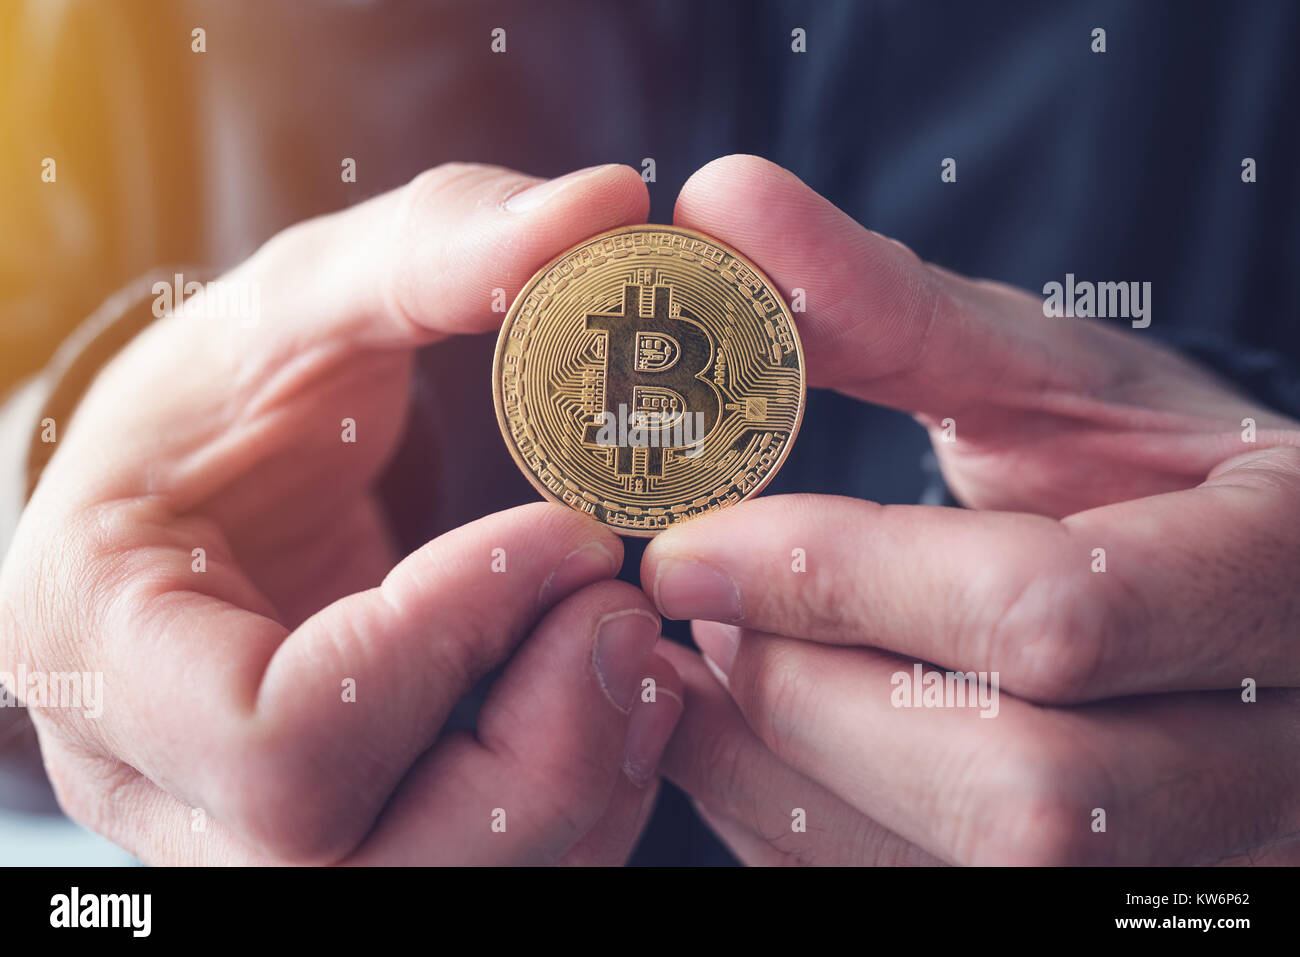 Man showing Bitcoin, close up of hands with BTC cryptocurrency coin Stock Photo